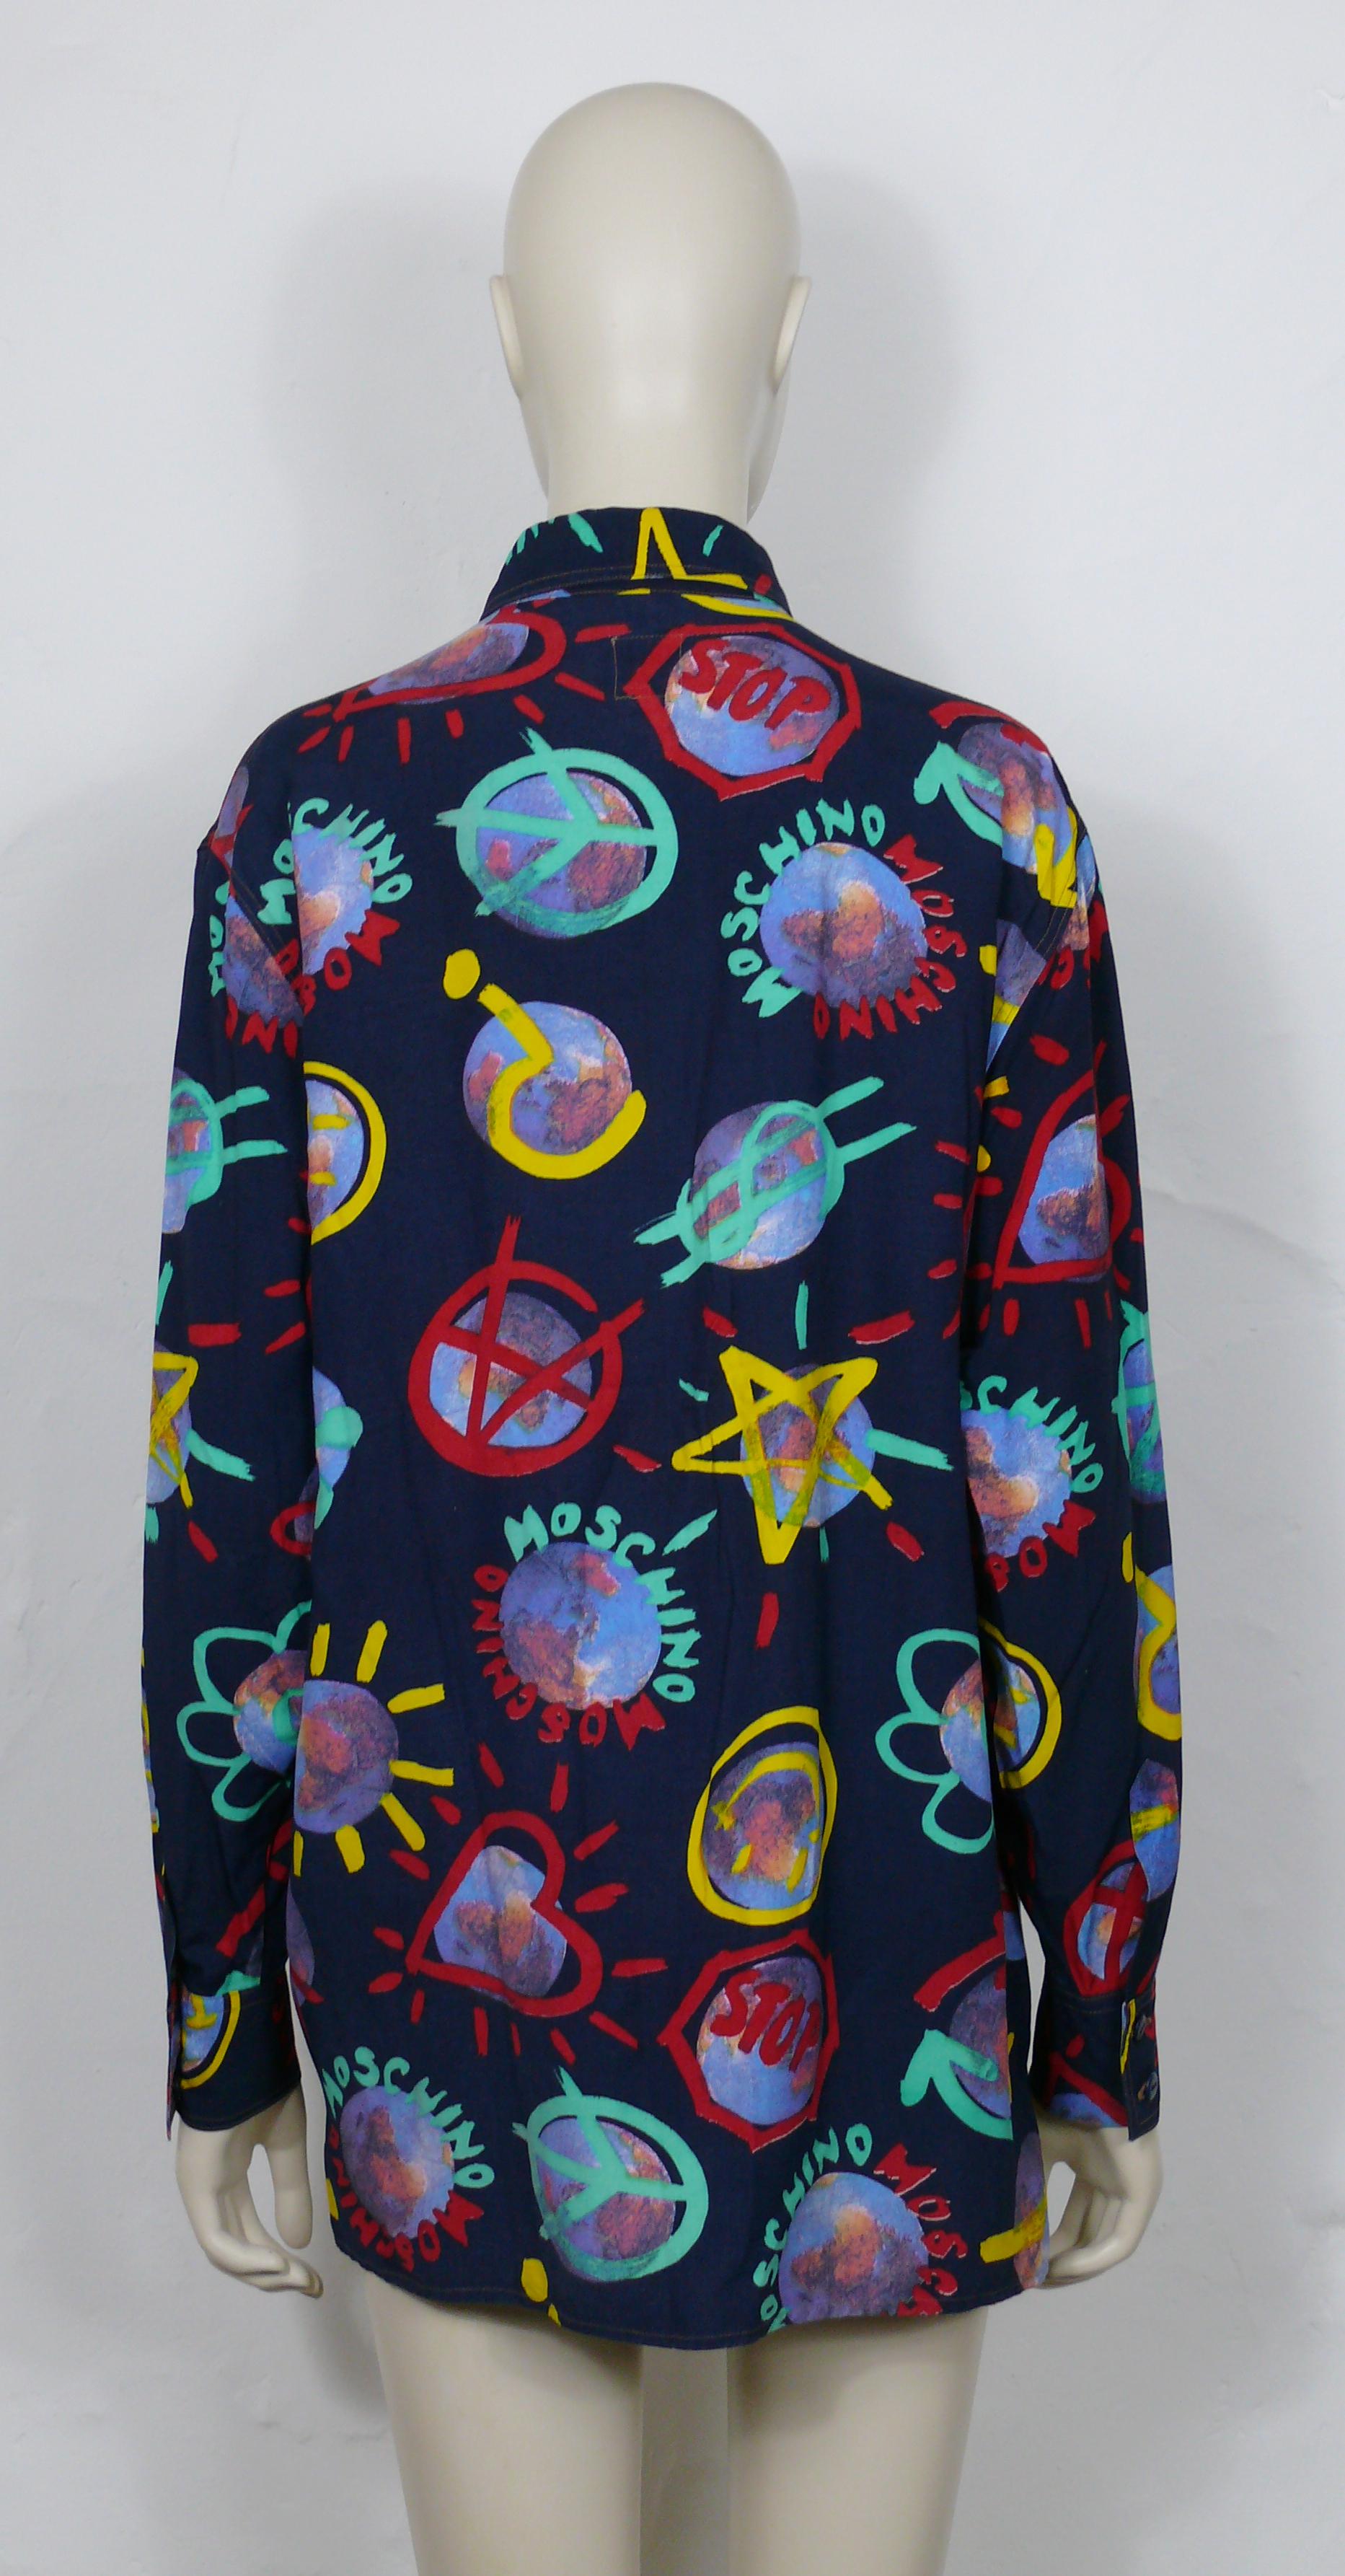 Moschino Vintage Earth Peace Smiley Anarchy... Print Shirt For Sale 6